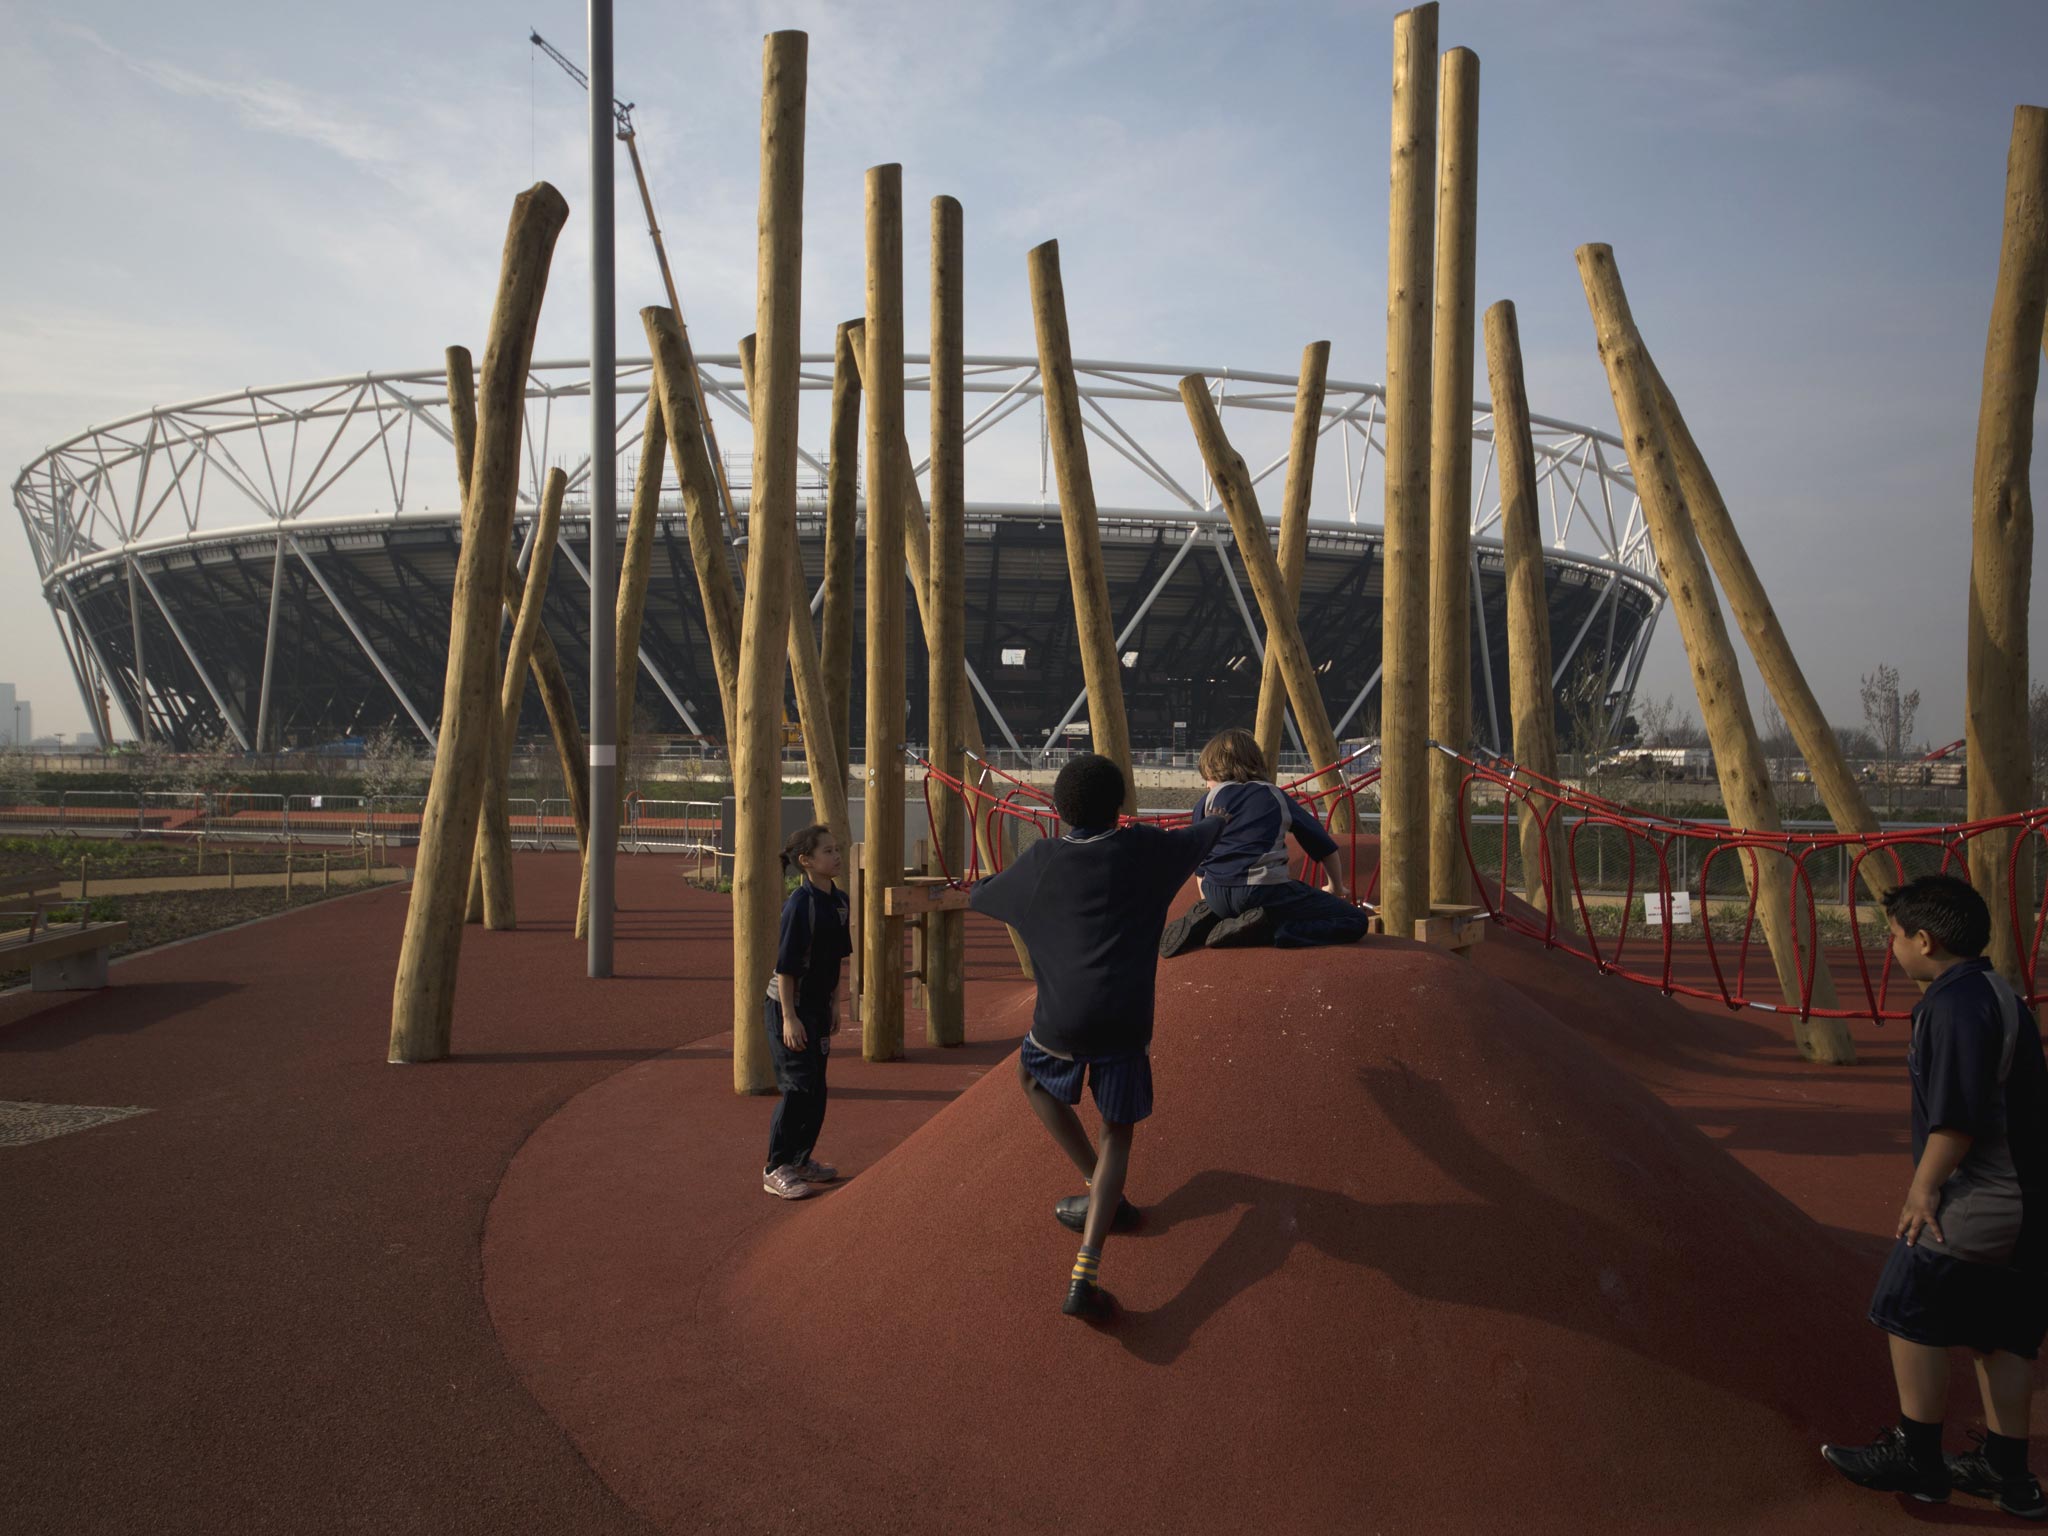 The new adventure play area, just outside the main stadium at the Queen Elizabeth Olympic Park, should prove popular, but the main attractions will be sports events, concerts and festivals